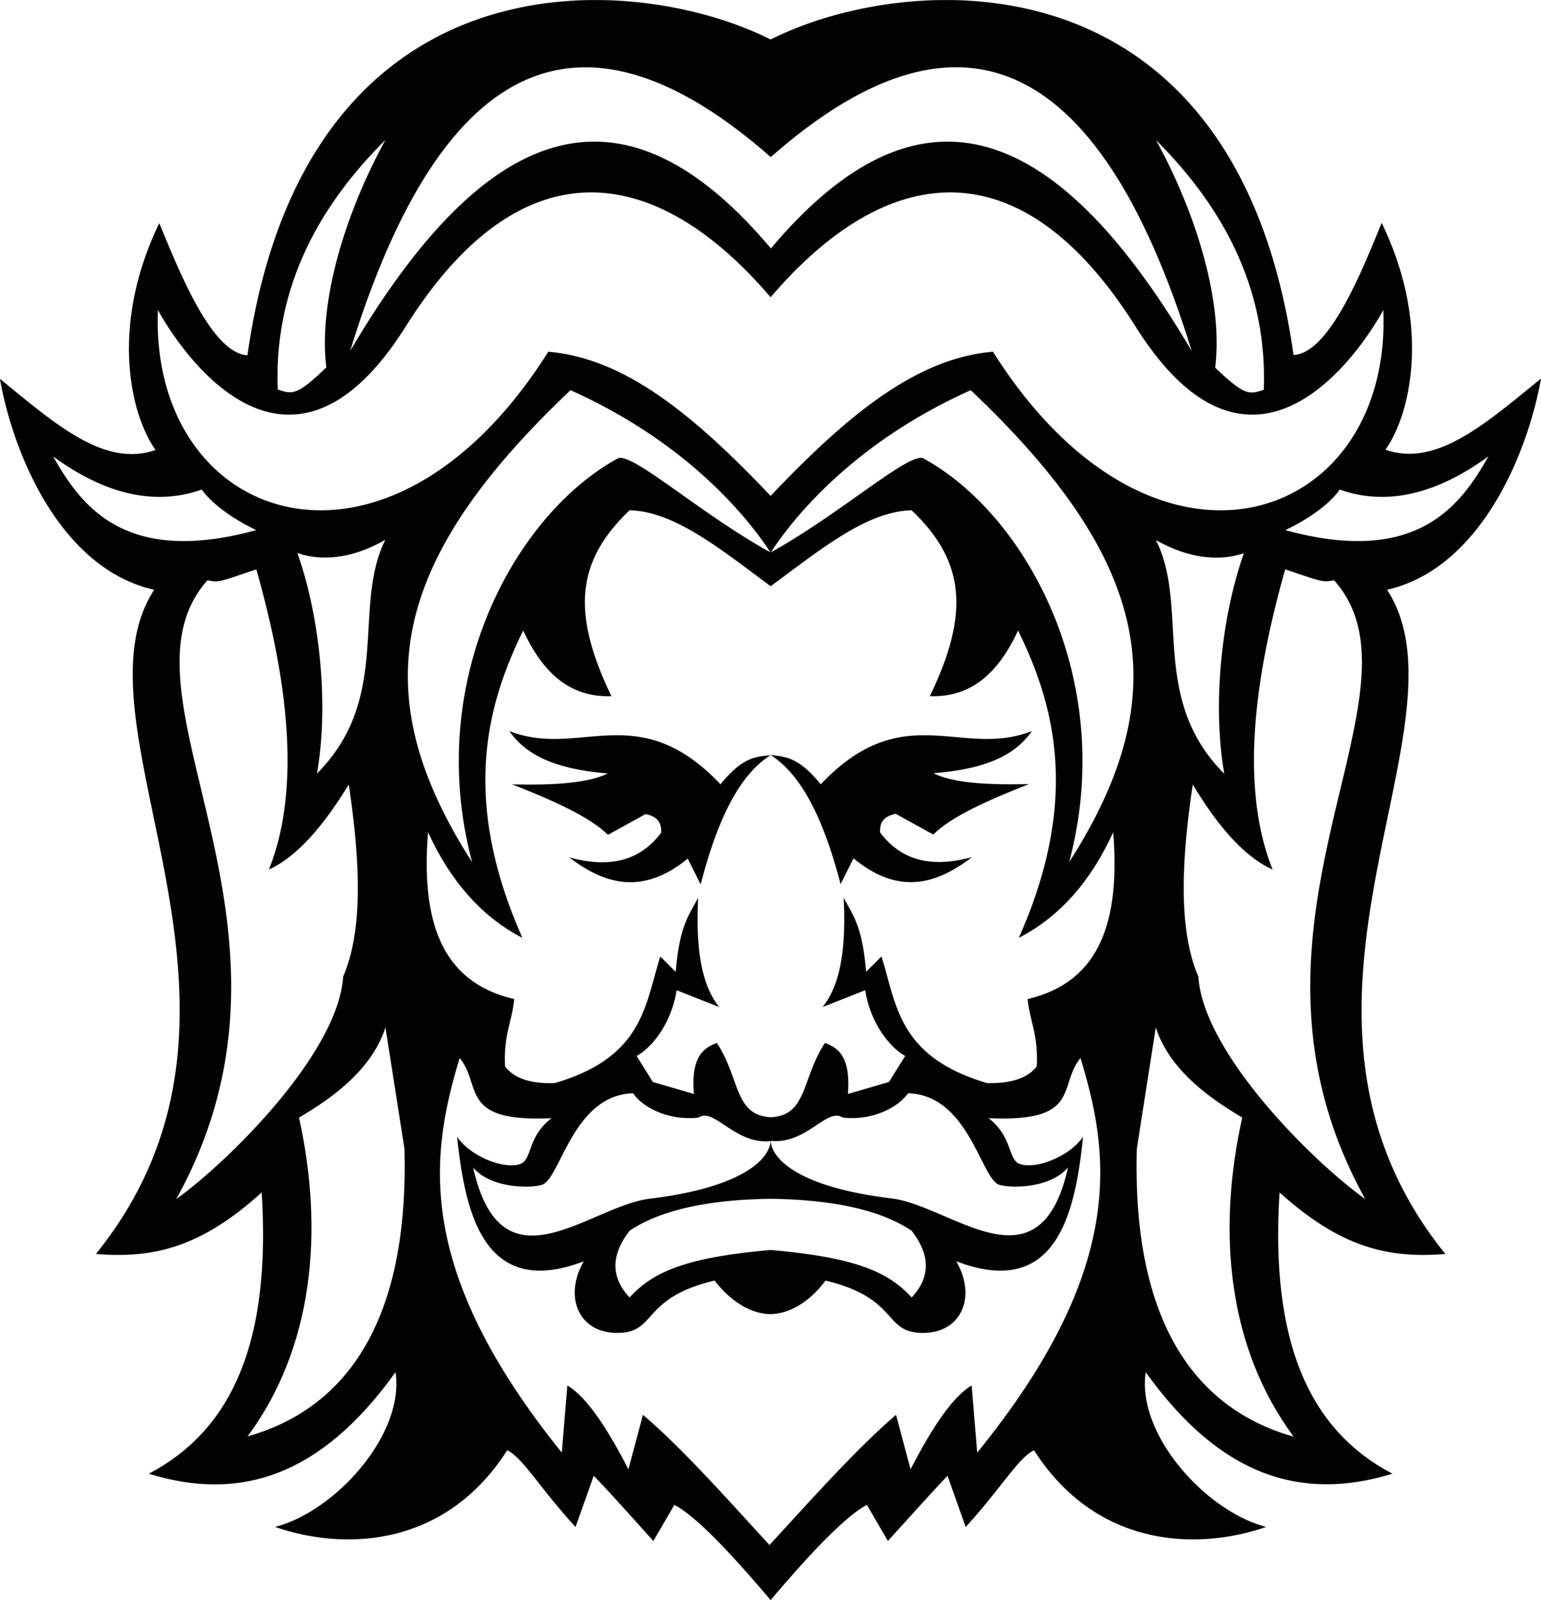 Mascot icon black and white illustration of head of Baldr, Balder or Baldur, a god in Norse mythology, and a son of the god Odin viewed from front on isolated background in retro style.